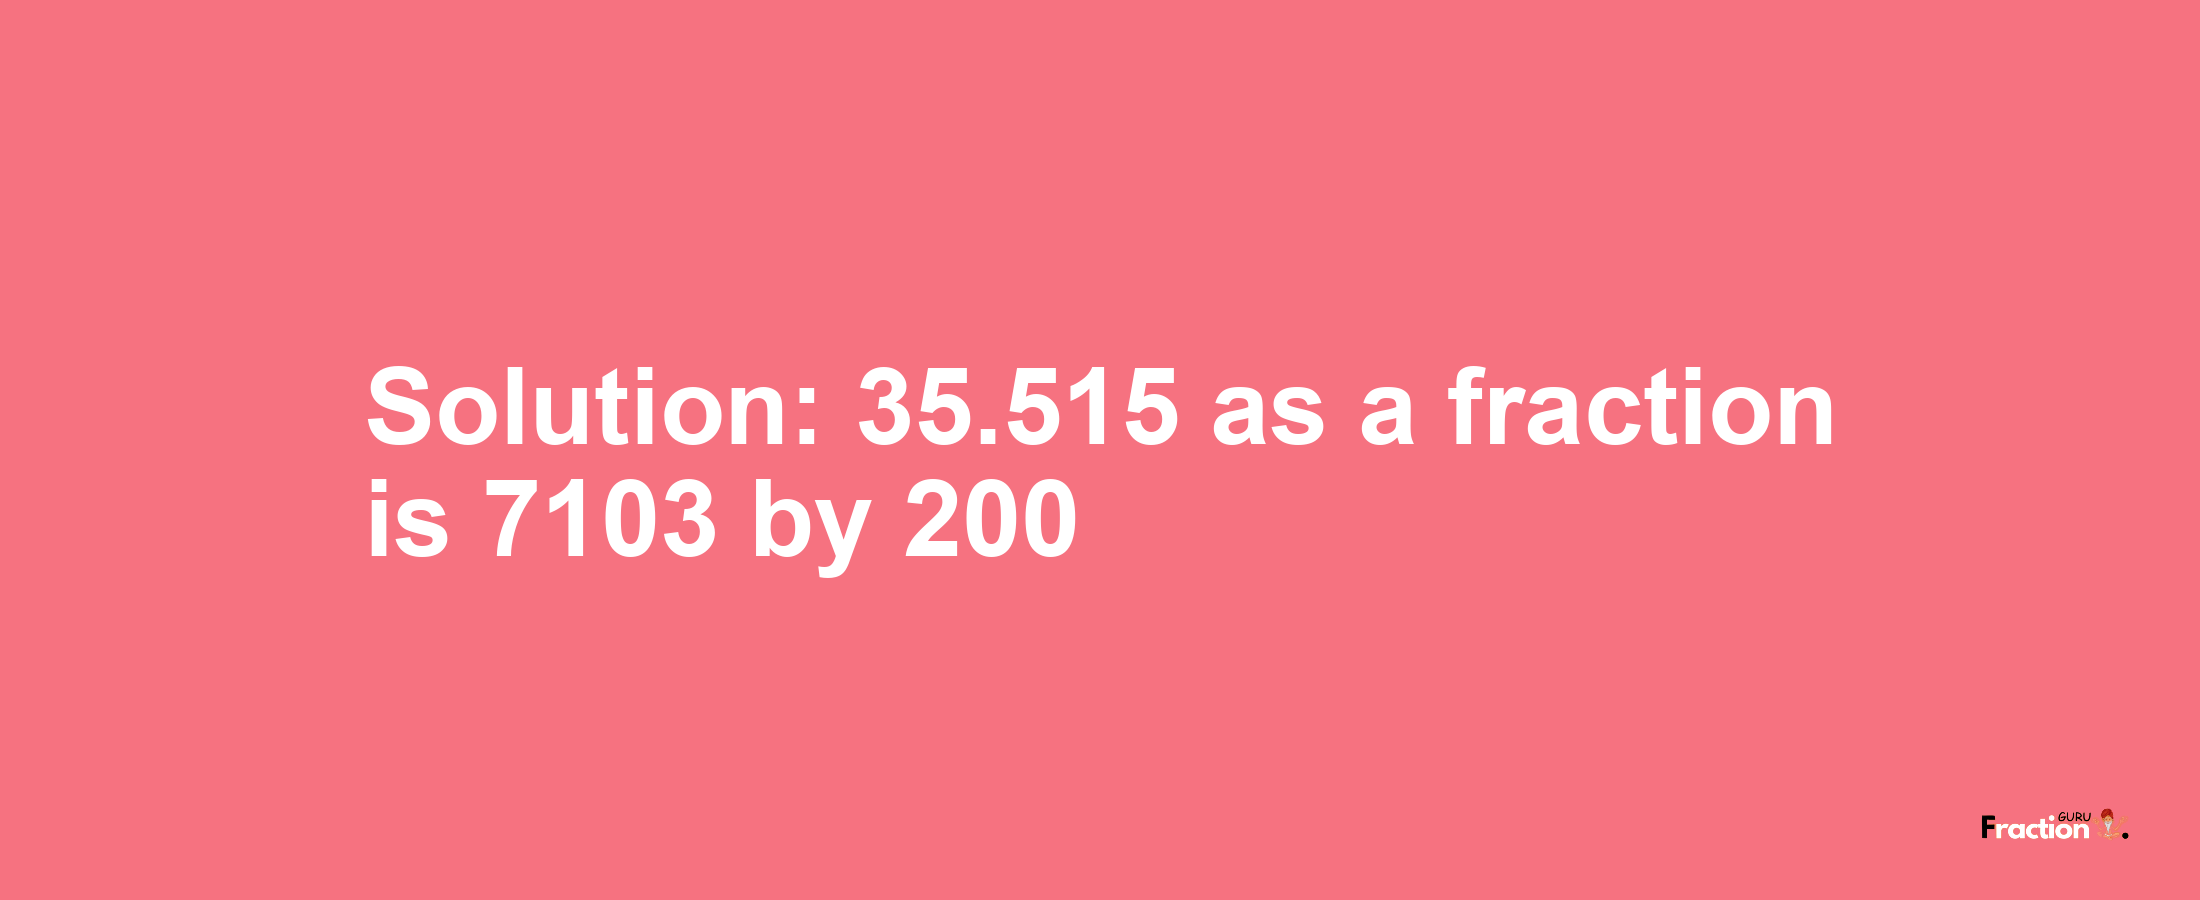 Solution:35.515 as a fraction is 7103/200